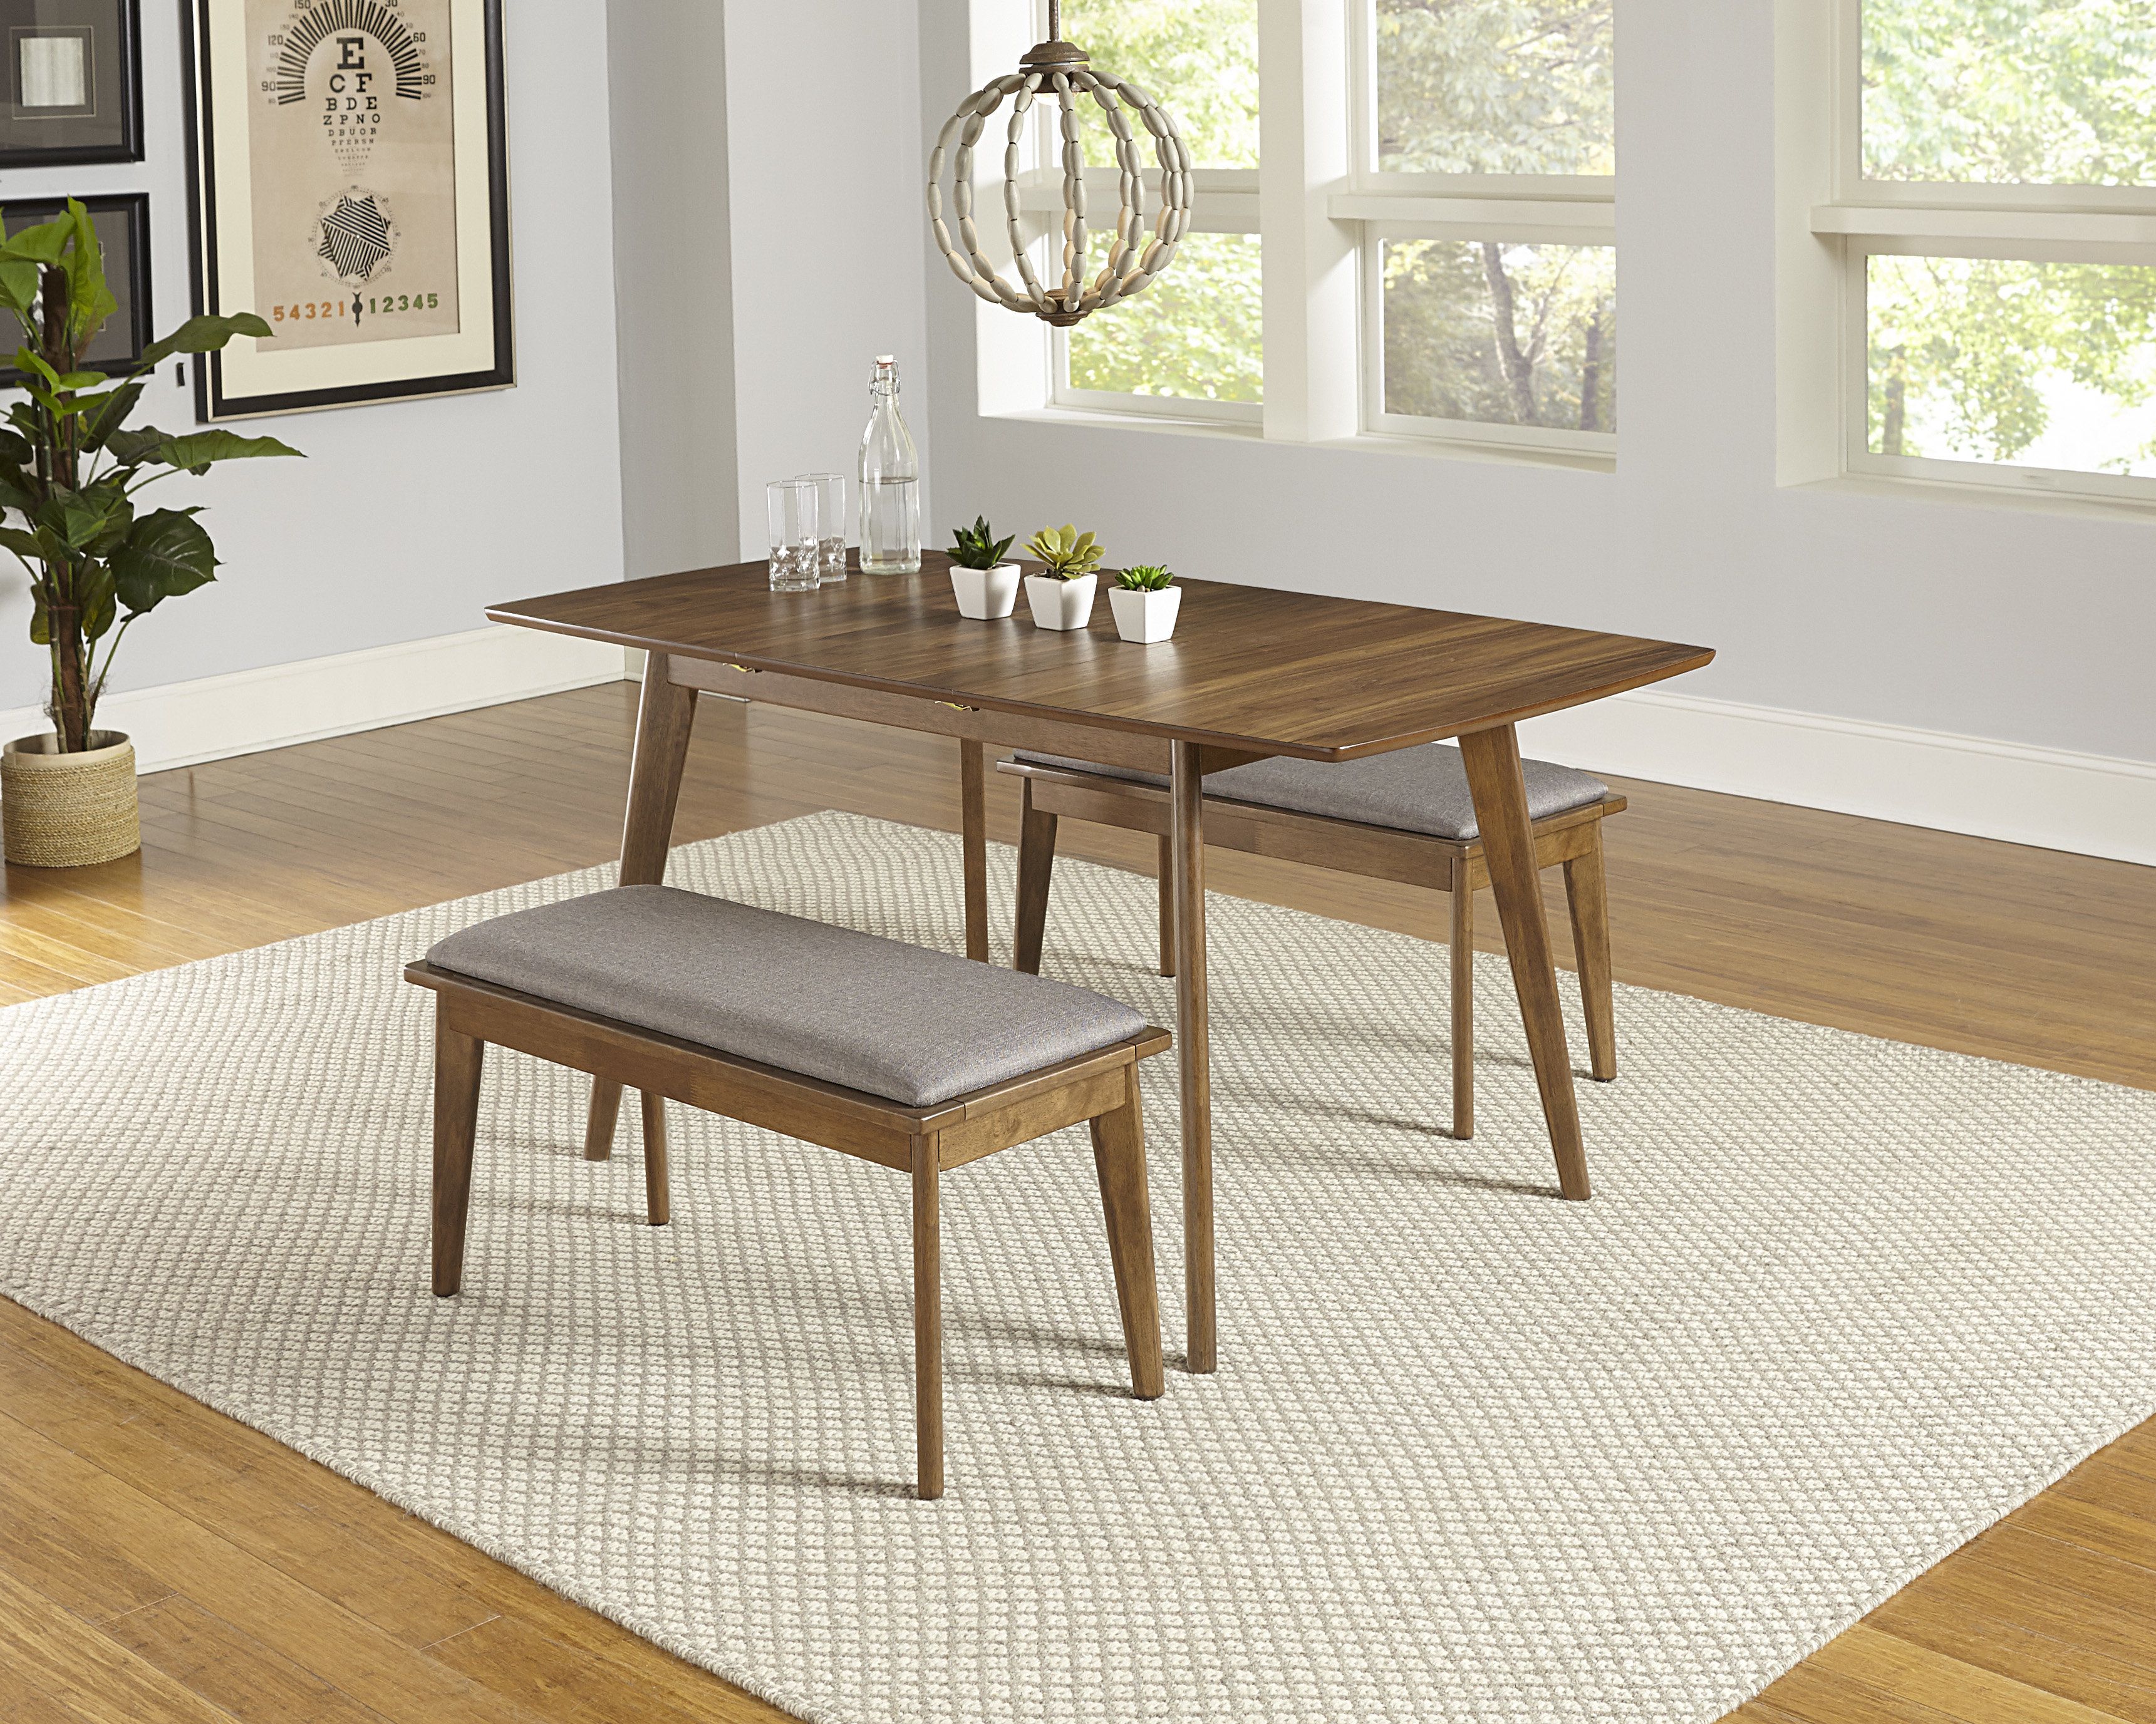 Rockaway 3 Piece Extendable Solid Wood Dining Set For Newest Kerley 4 Piece Dining Sets (View 5 of 20)